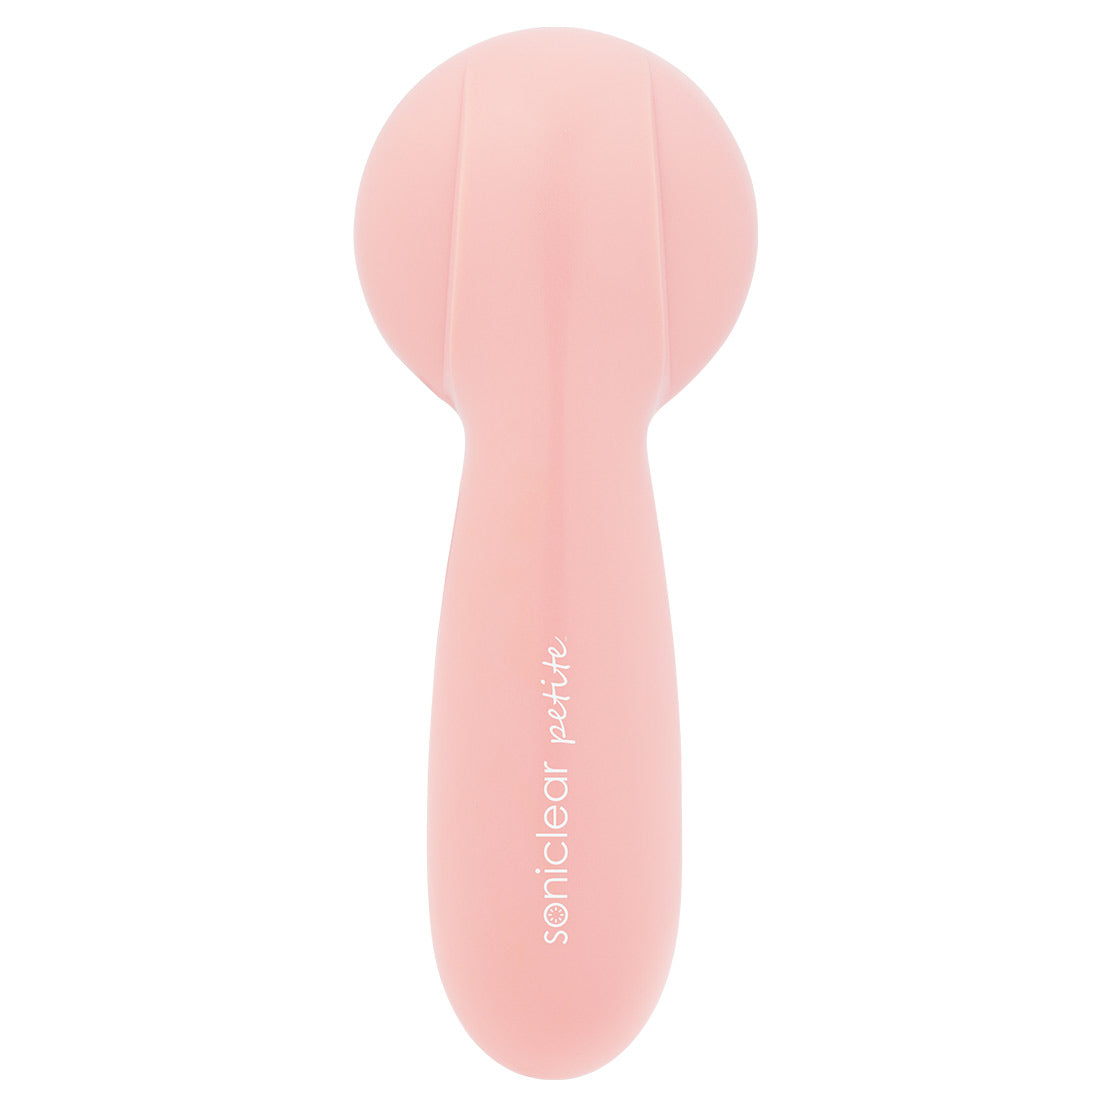 Millennial Pink Soniclear Petite Sonic Facial Cleansing Brush